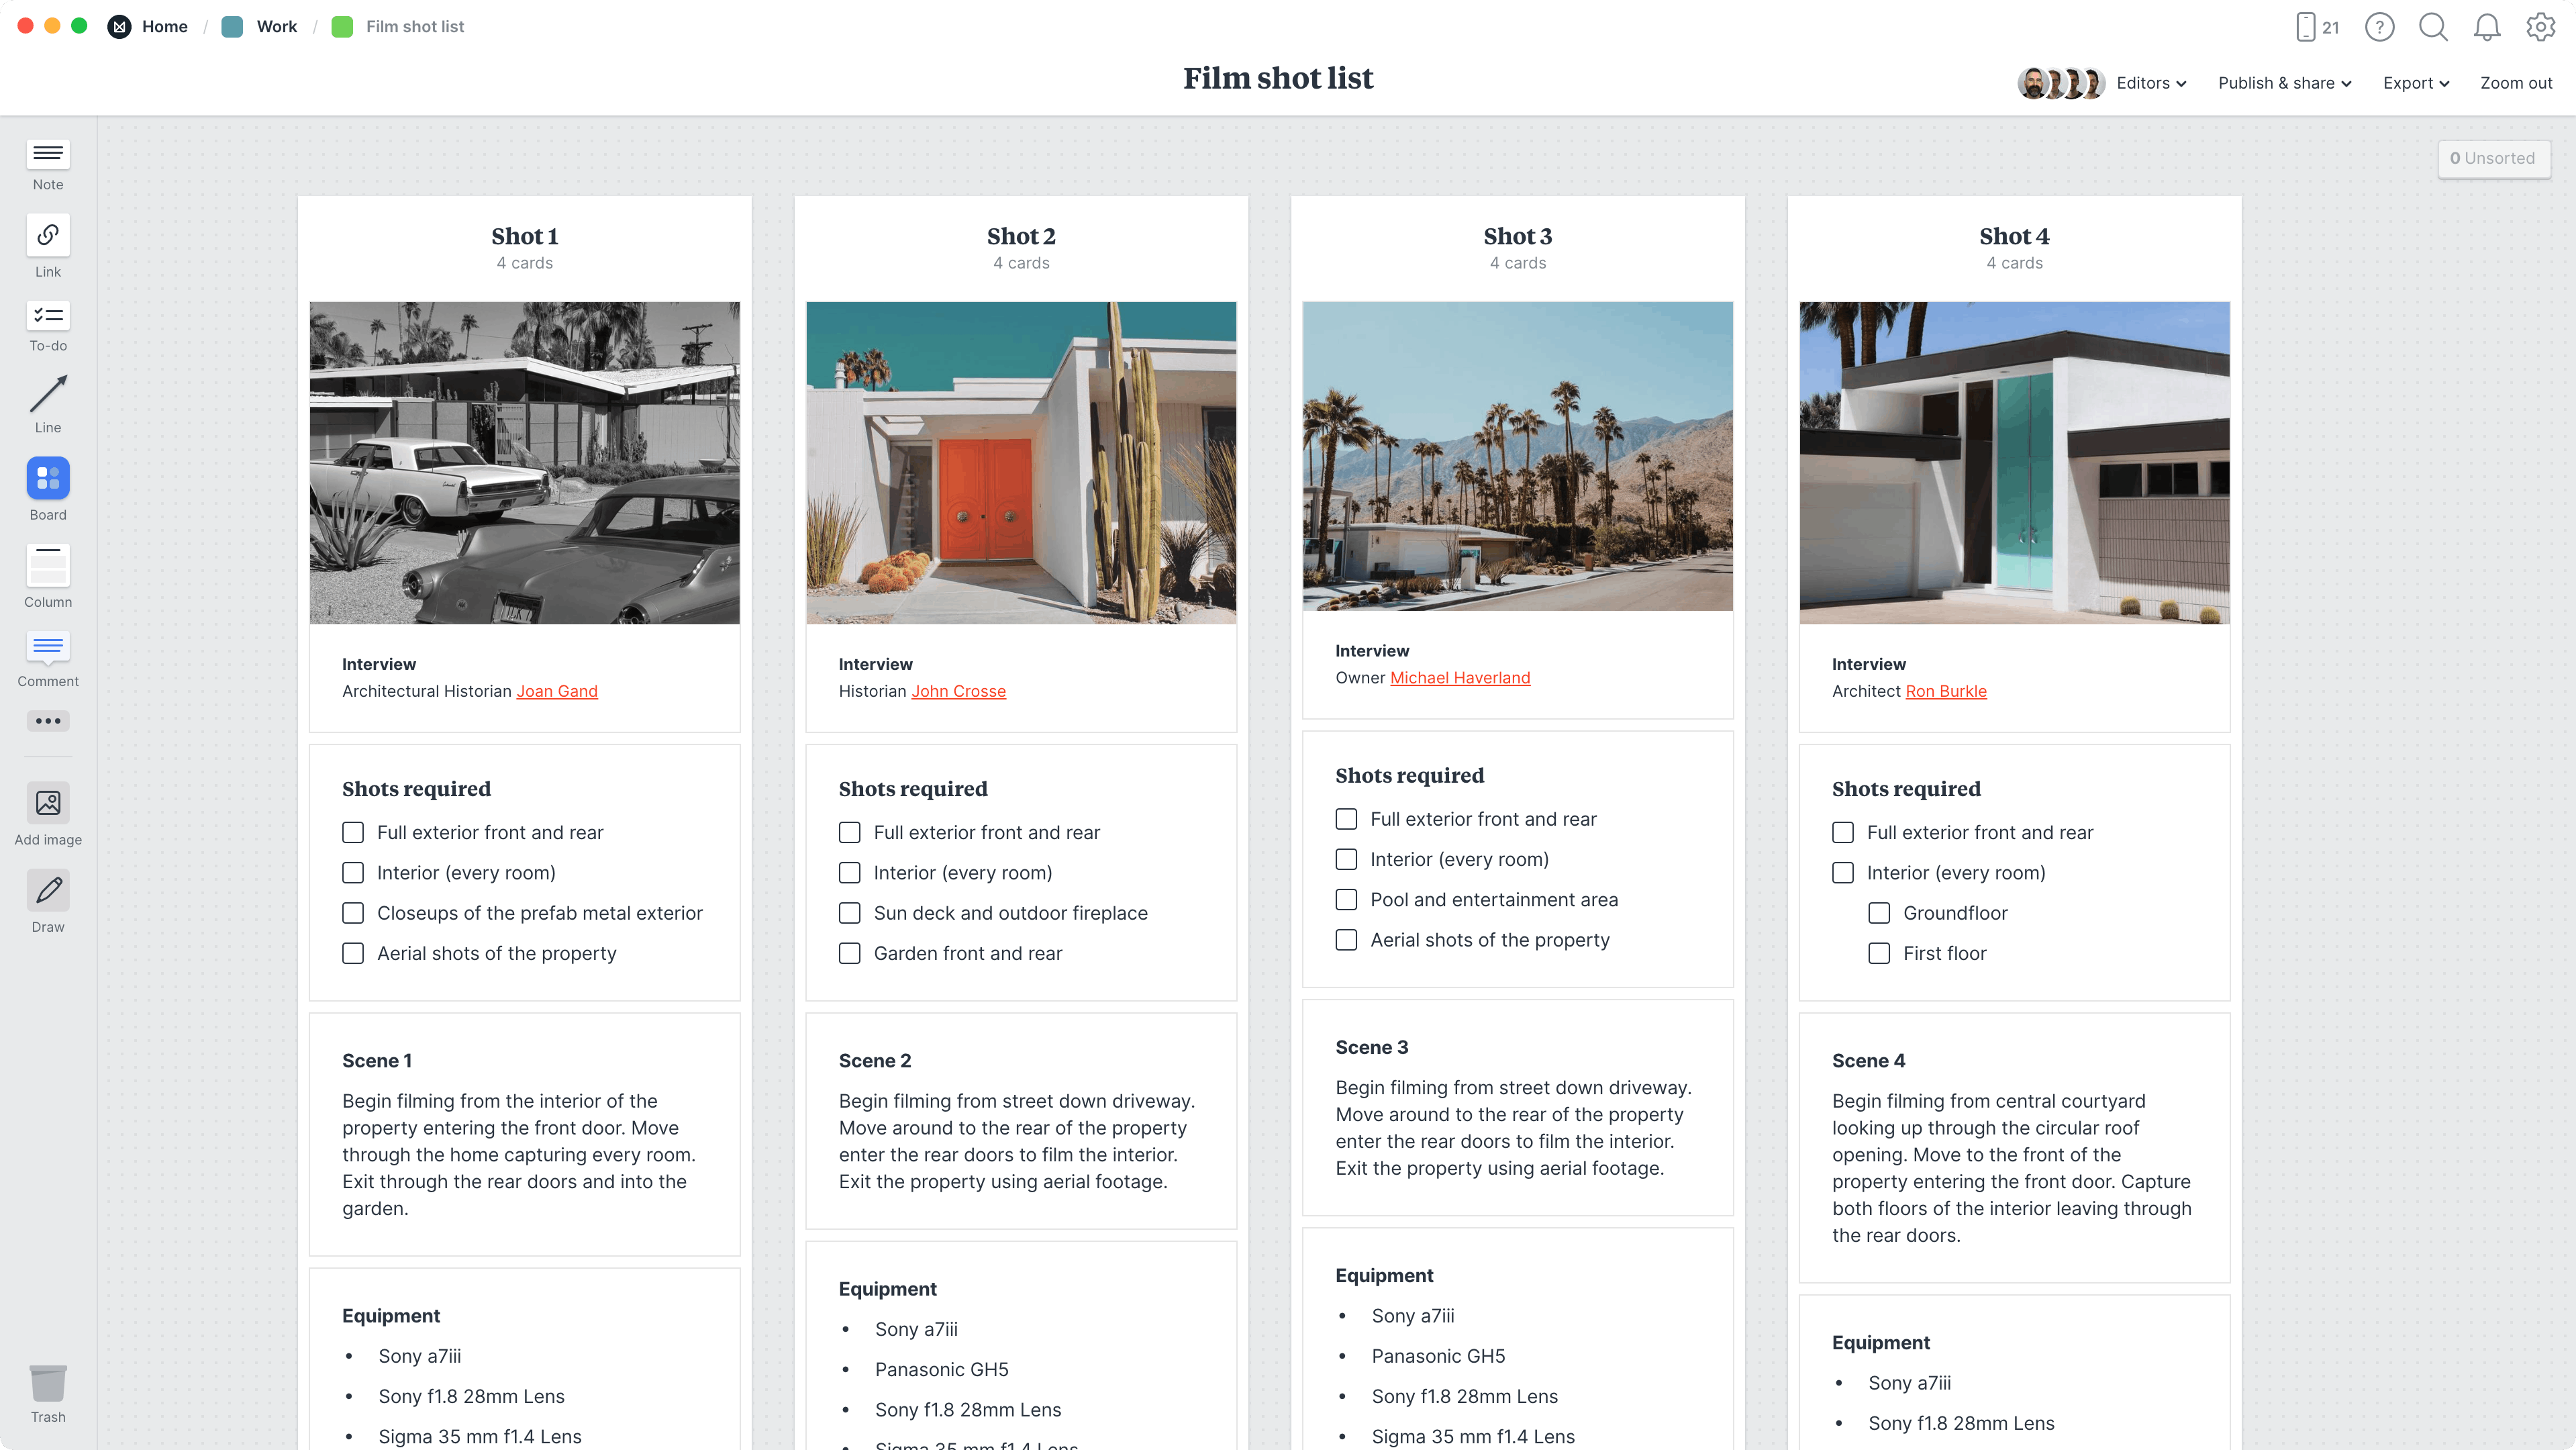 Film Shot List Template, within the Milanote app